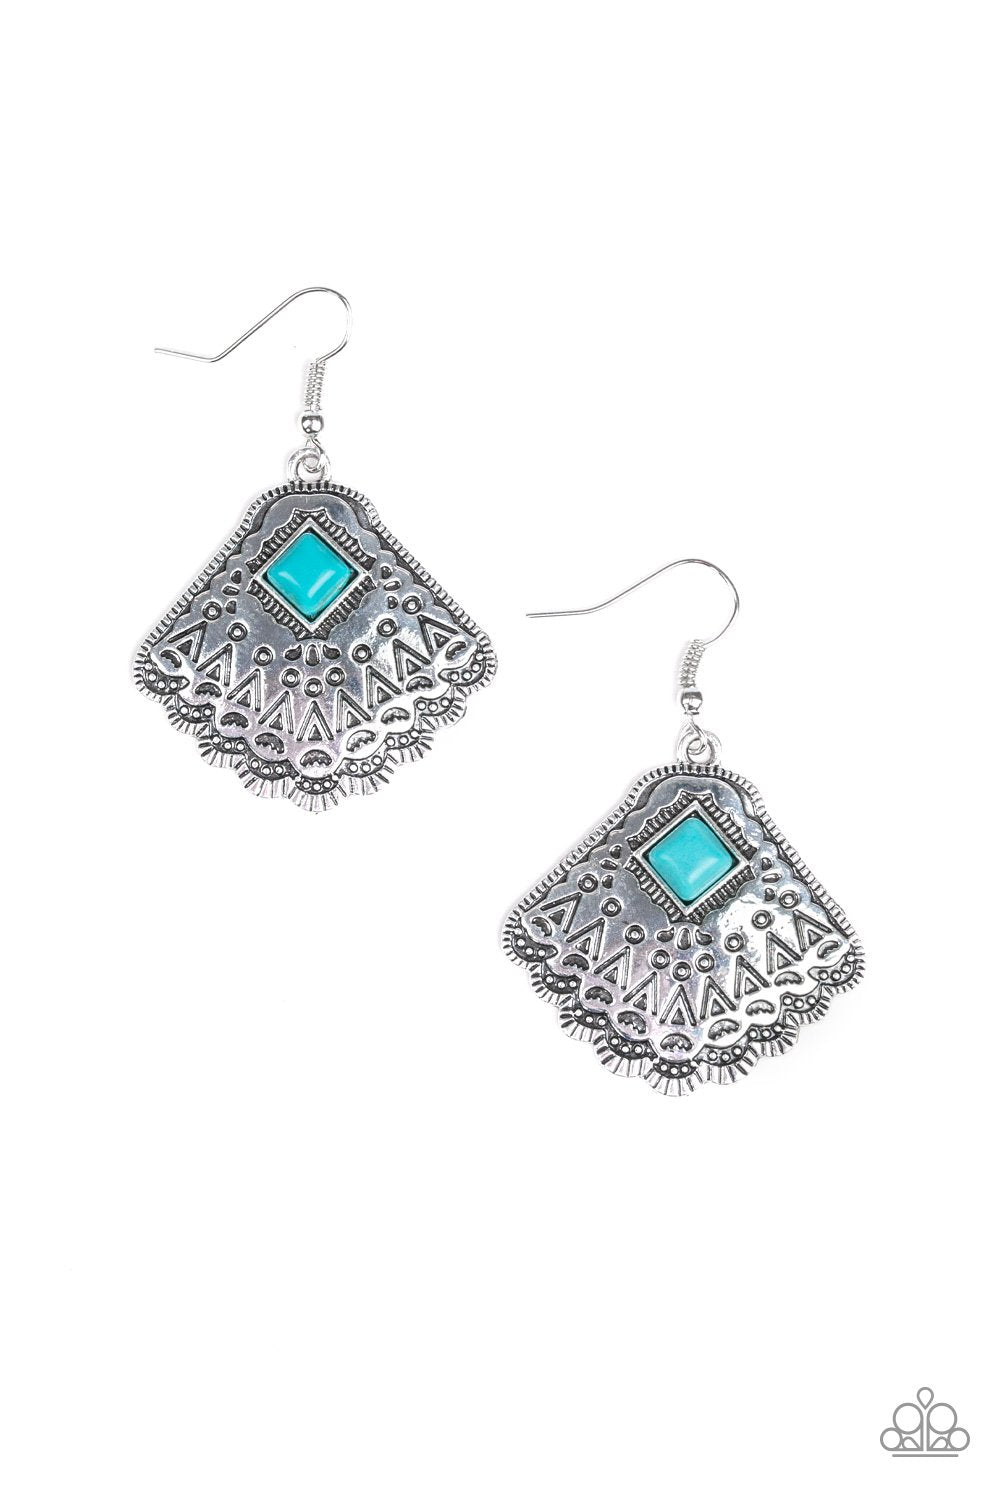 Mountain Mesa Silver and Turquoise Blue Stone Earrings - Paparazzi Accessories-CarasShop.com - $5 Jewelry by Cara Jewels